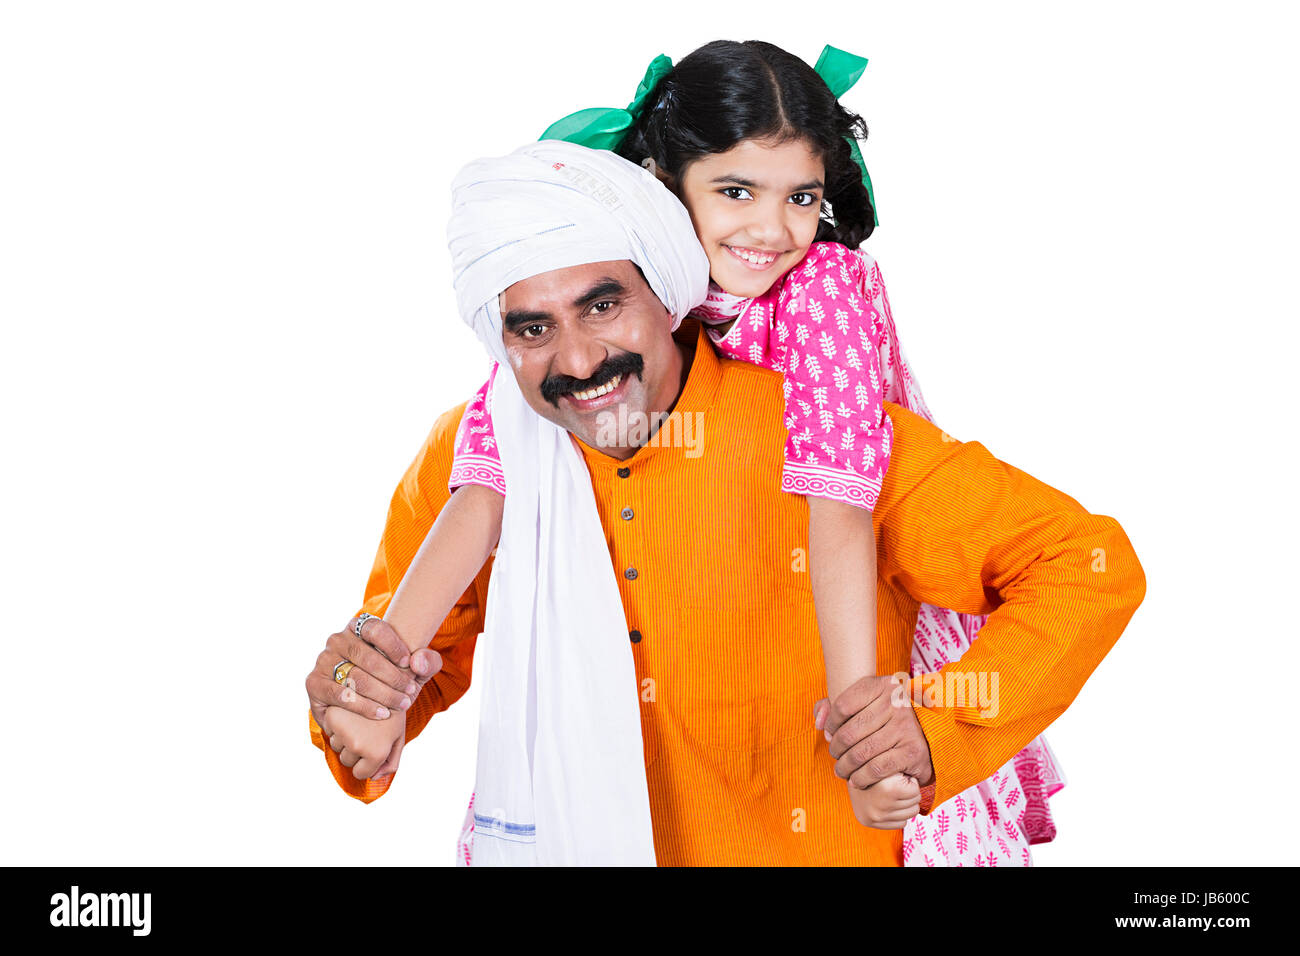 Indian Rural Farmer Father giving her daughter a piggy back ride On White Background Stock Photo